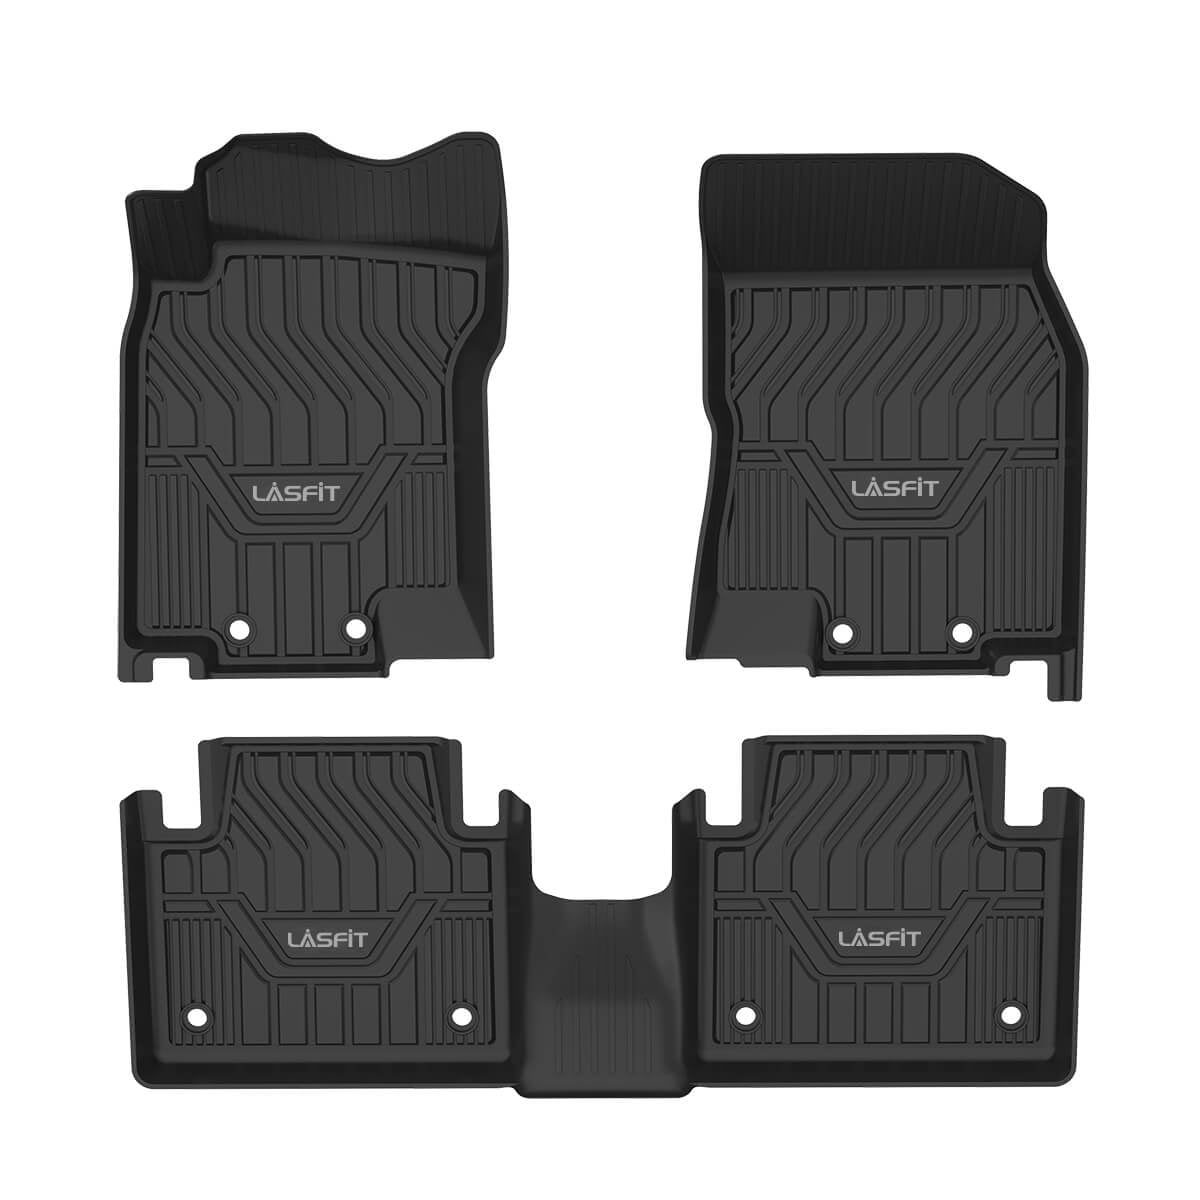 Front and Second Row Black Ultimate Protection with a Stylish Look 4pcs Road Comforts Custom Fit Nissan Rogue 2014 2015 2016 2017 2018 2019 2020 All Weather Floor Mats 